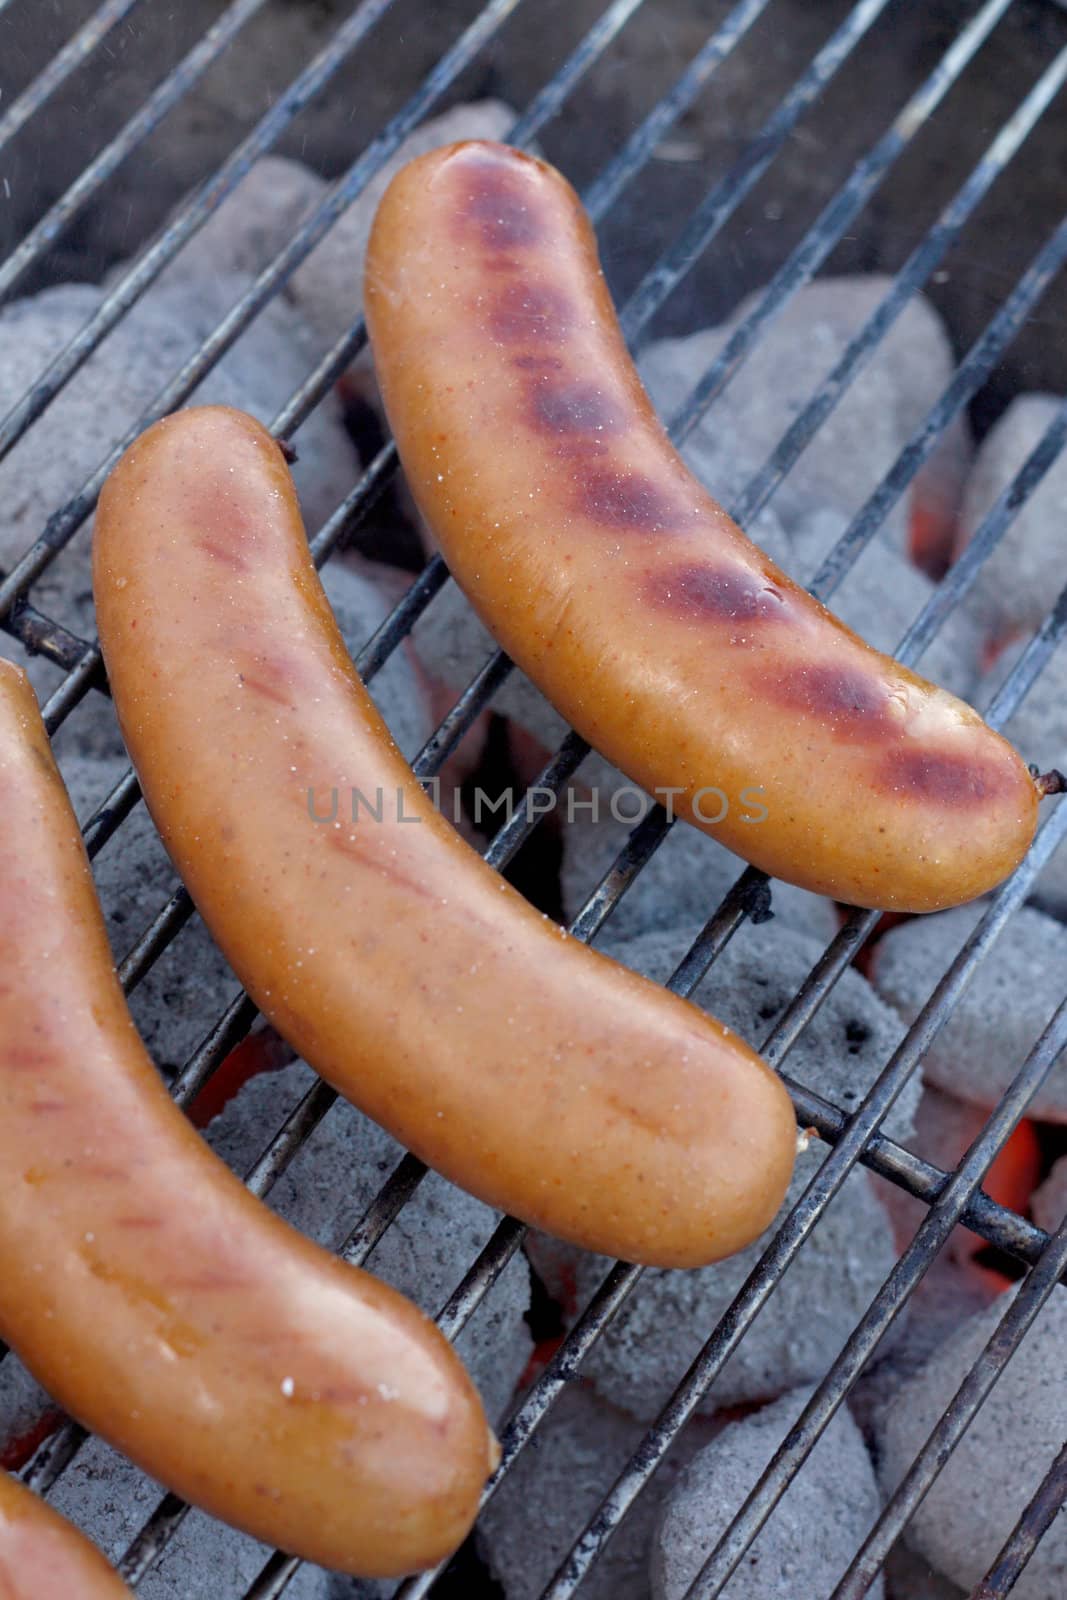 Sausages on a barbecue